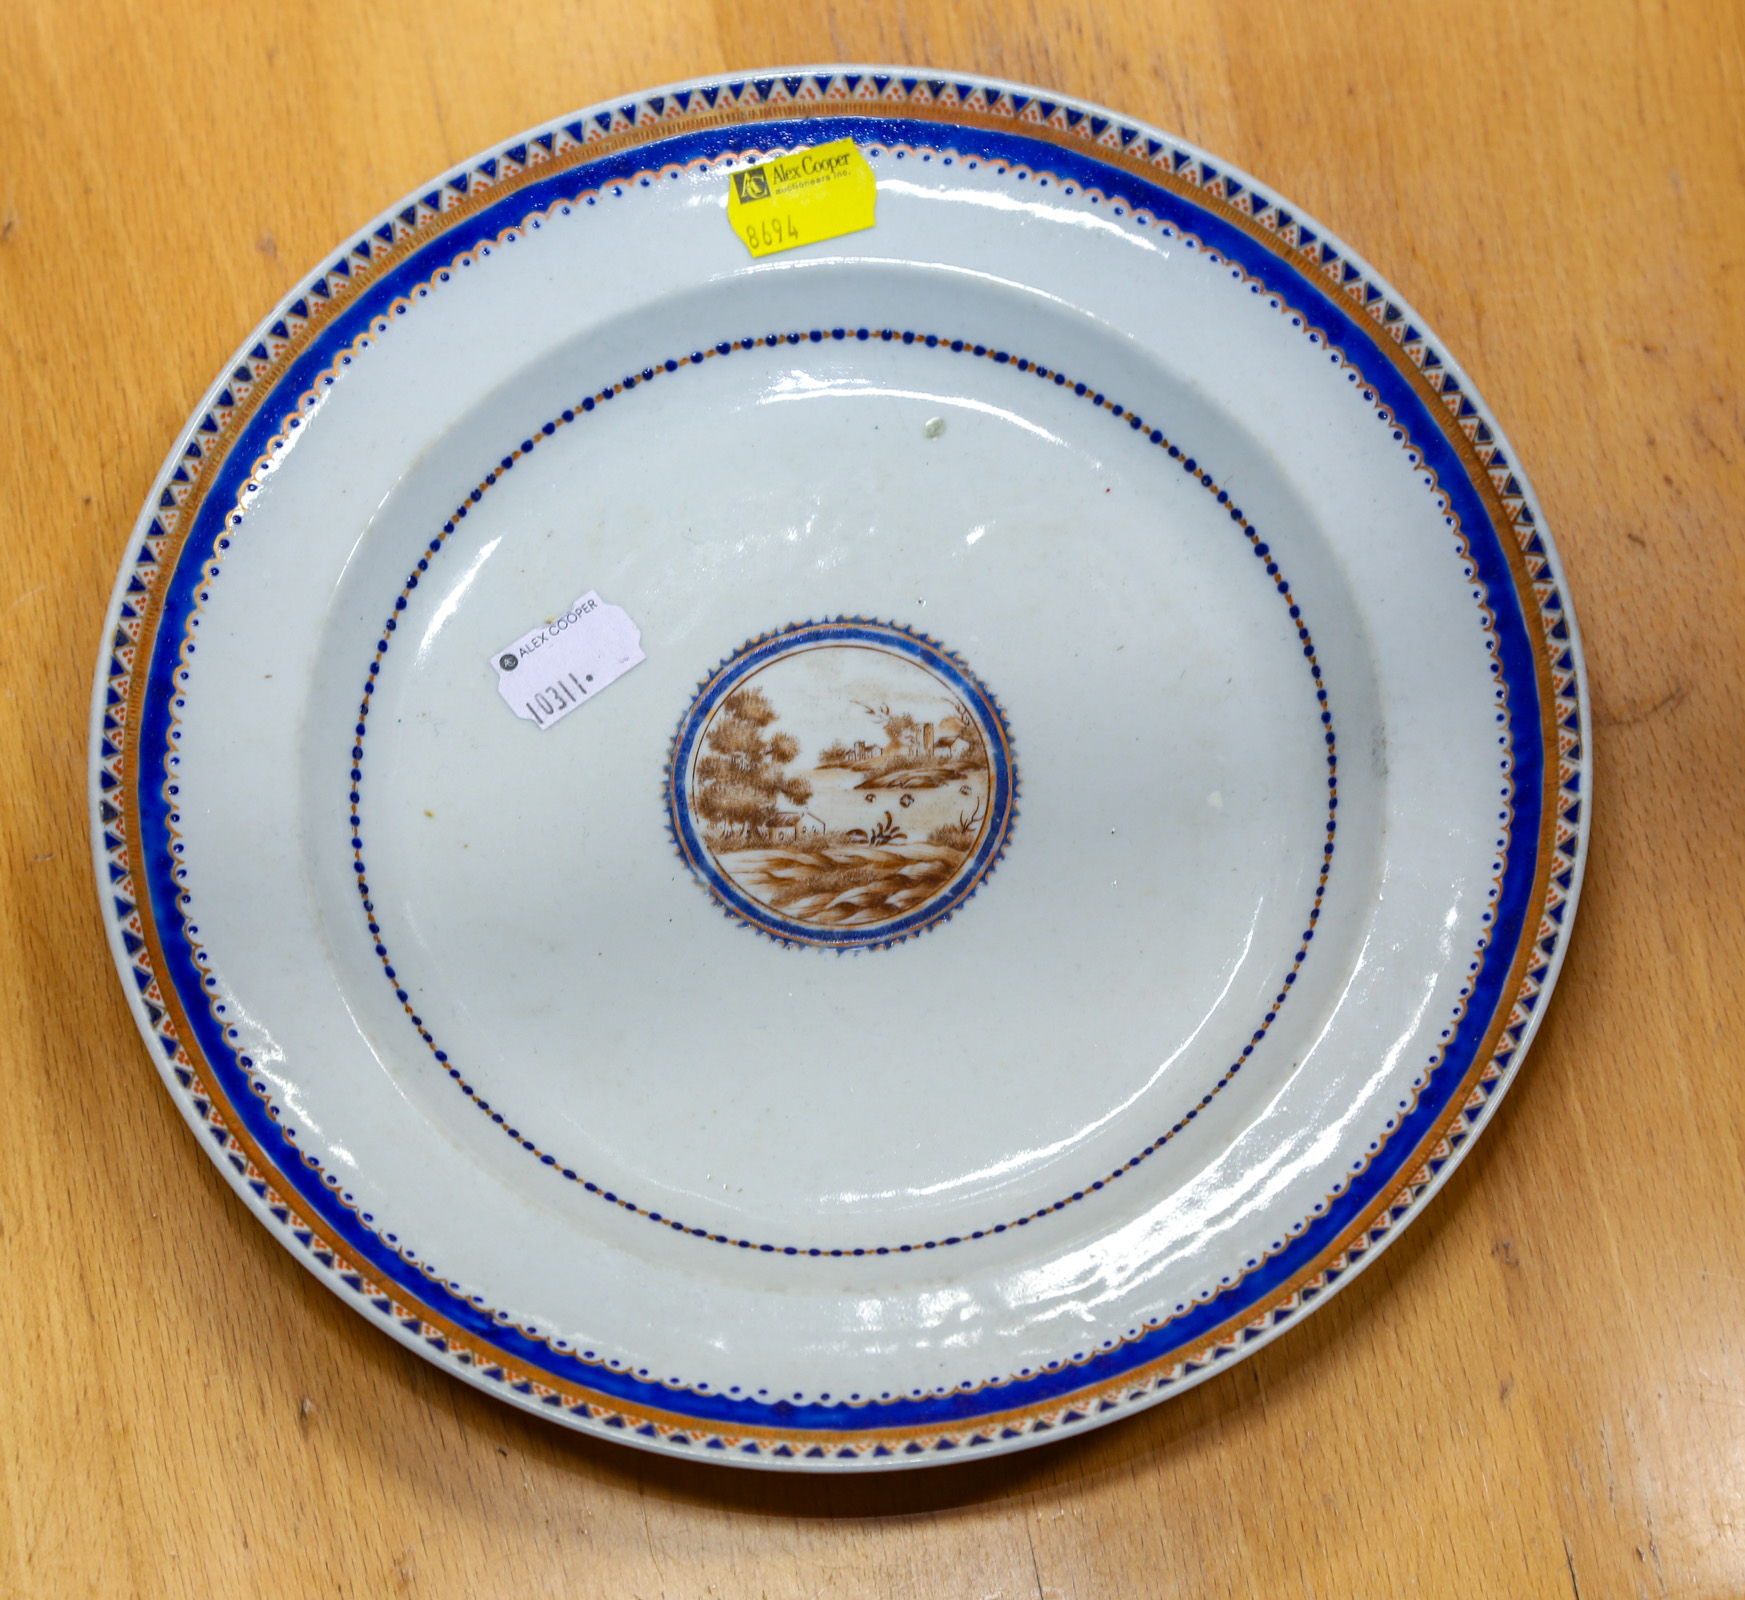 CHINESE EXPORT PORCELAIN PLATE